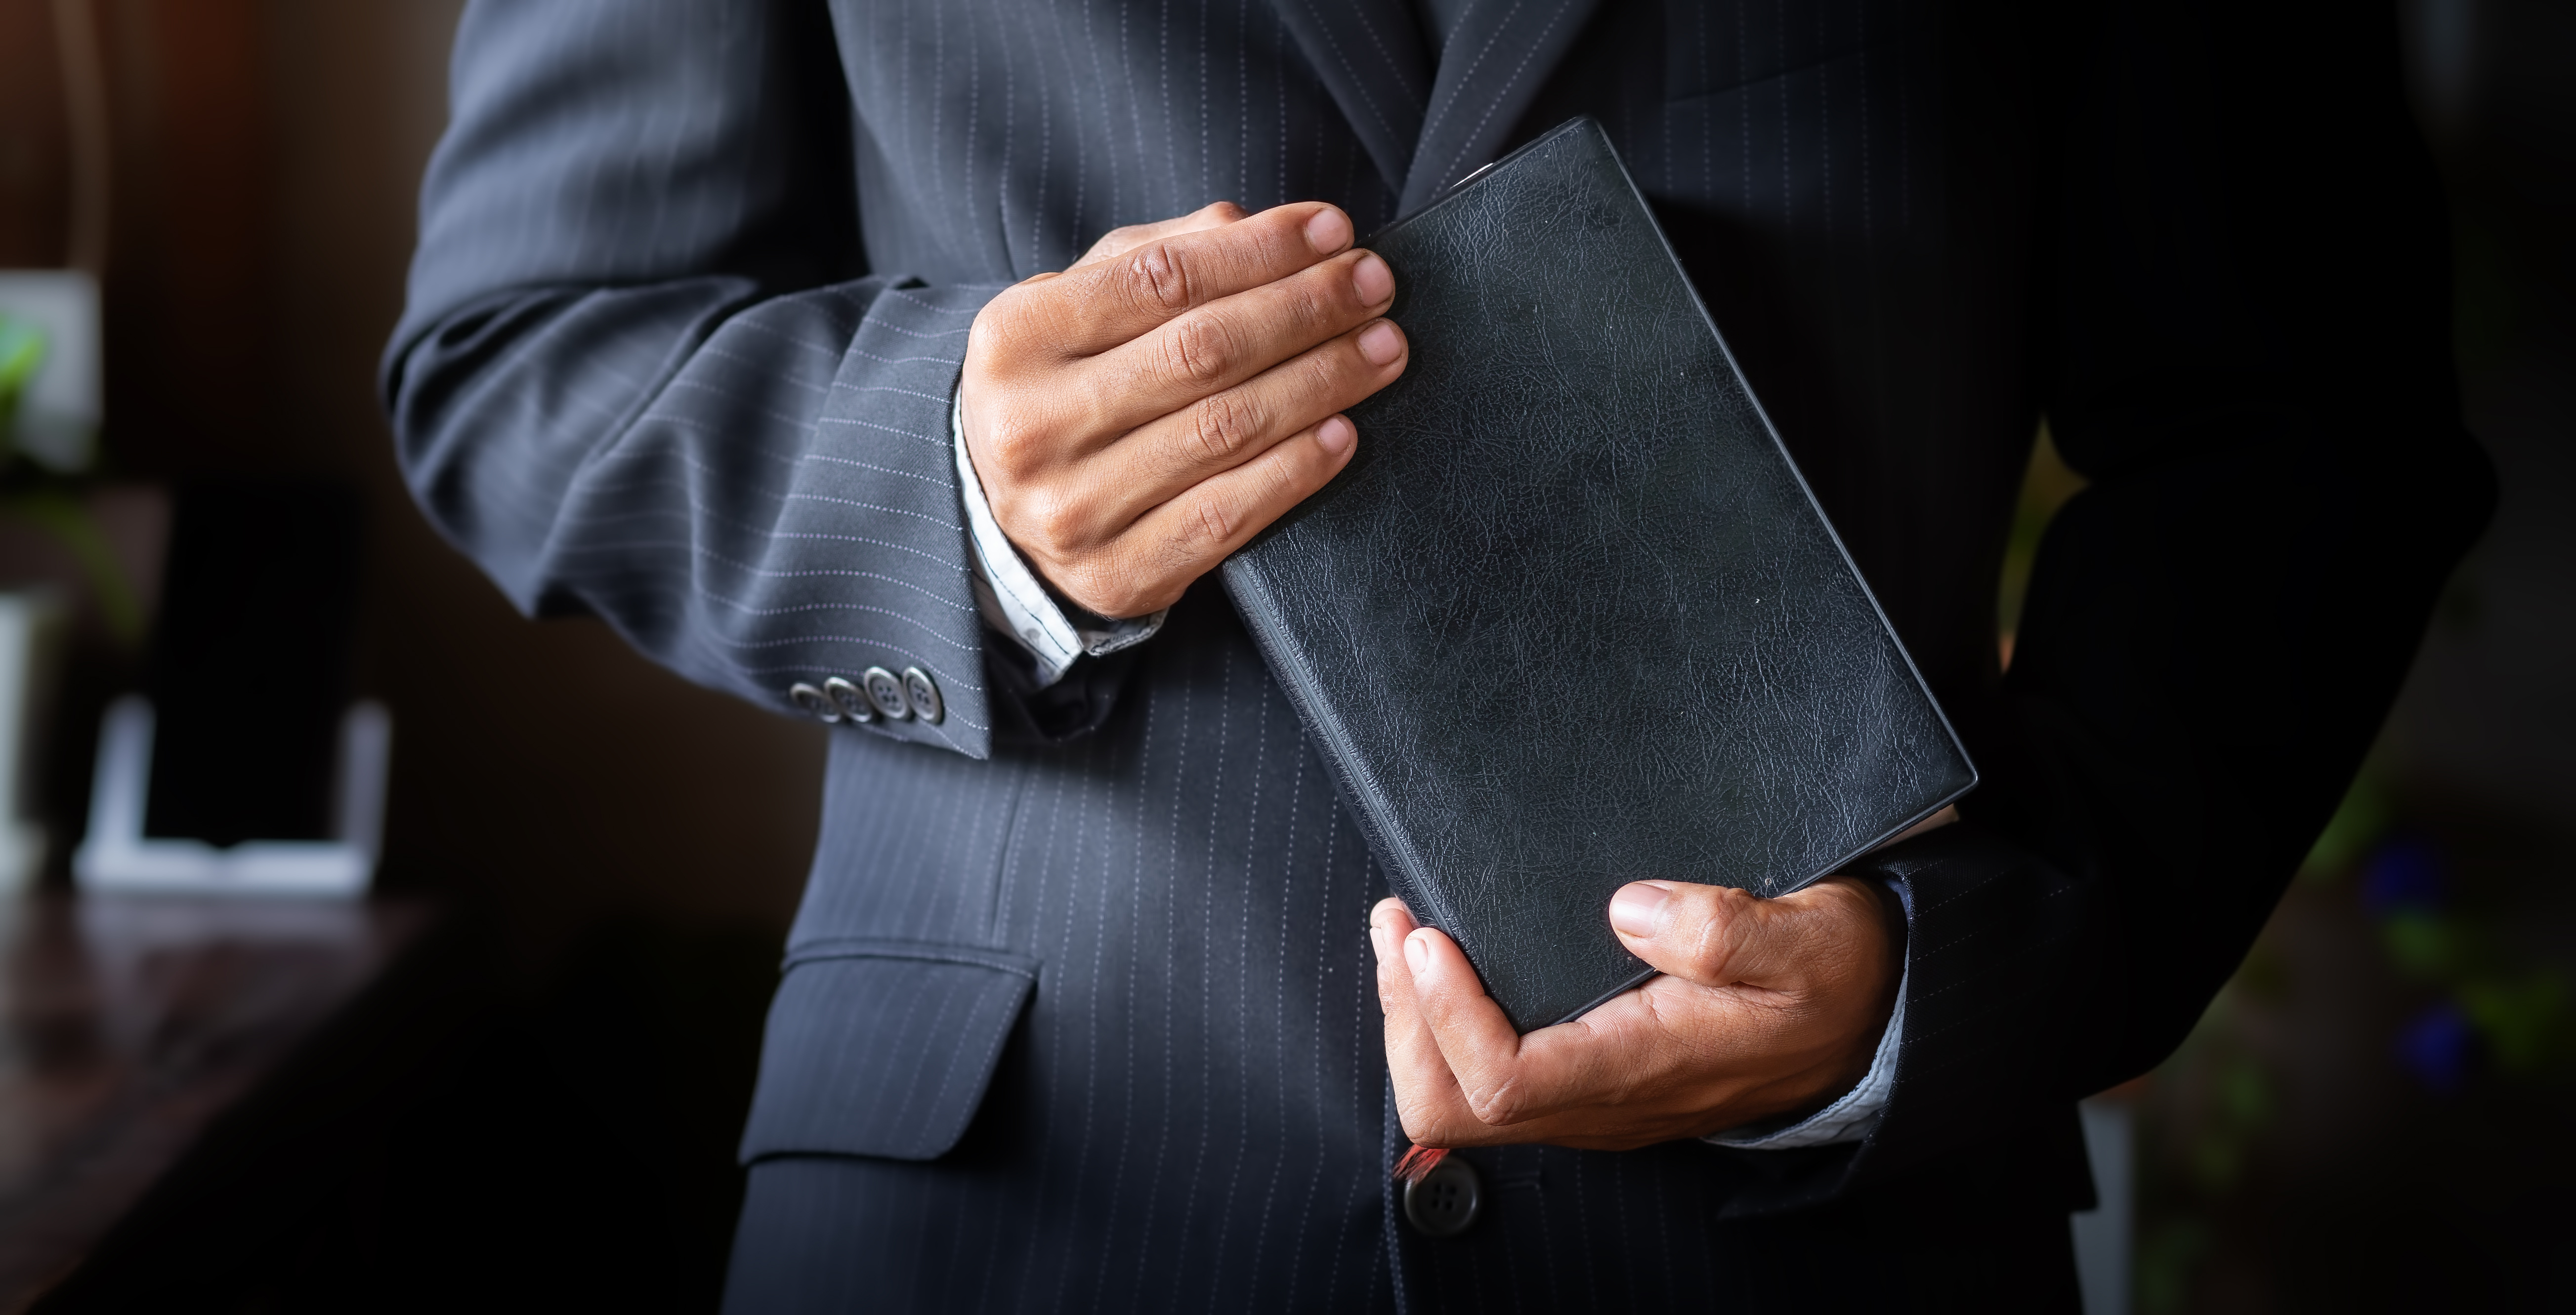 stock photo of man in suit with bible